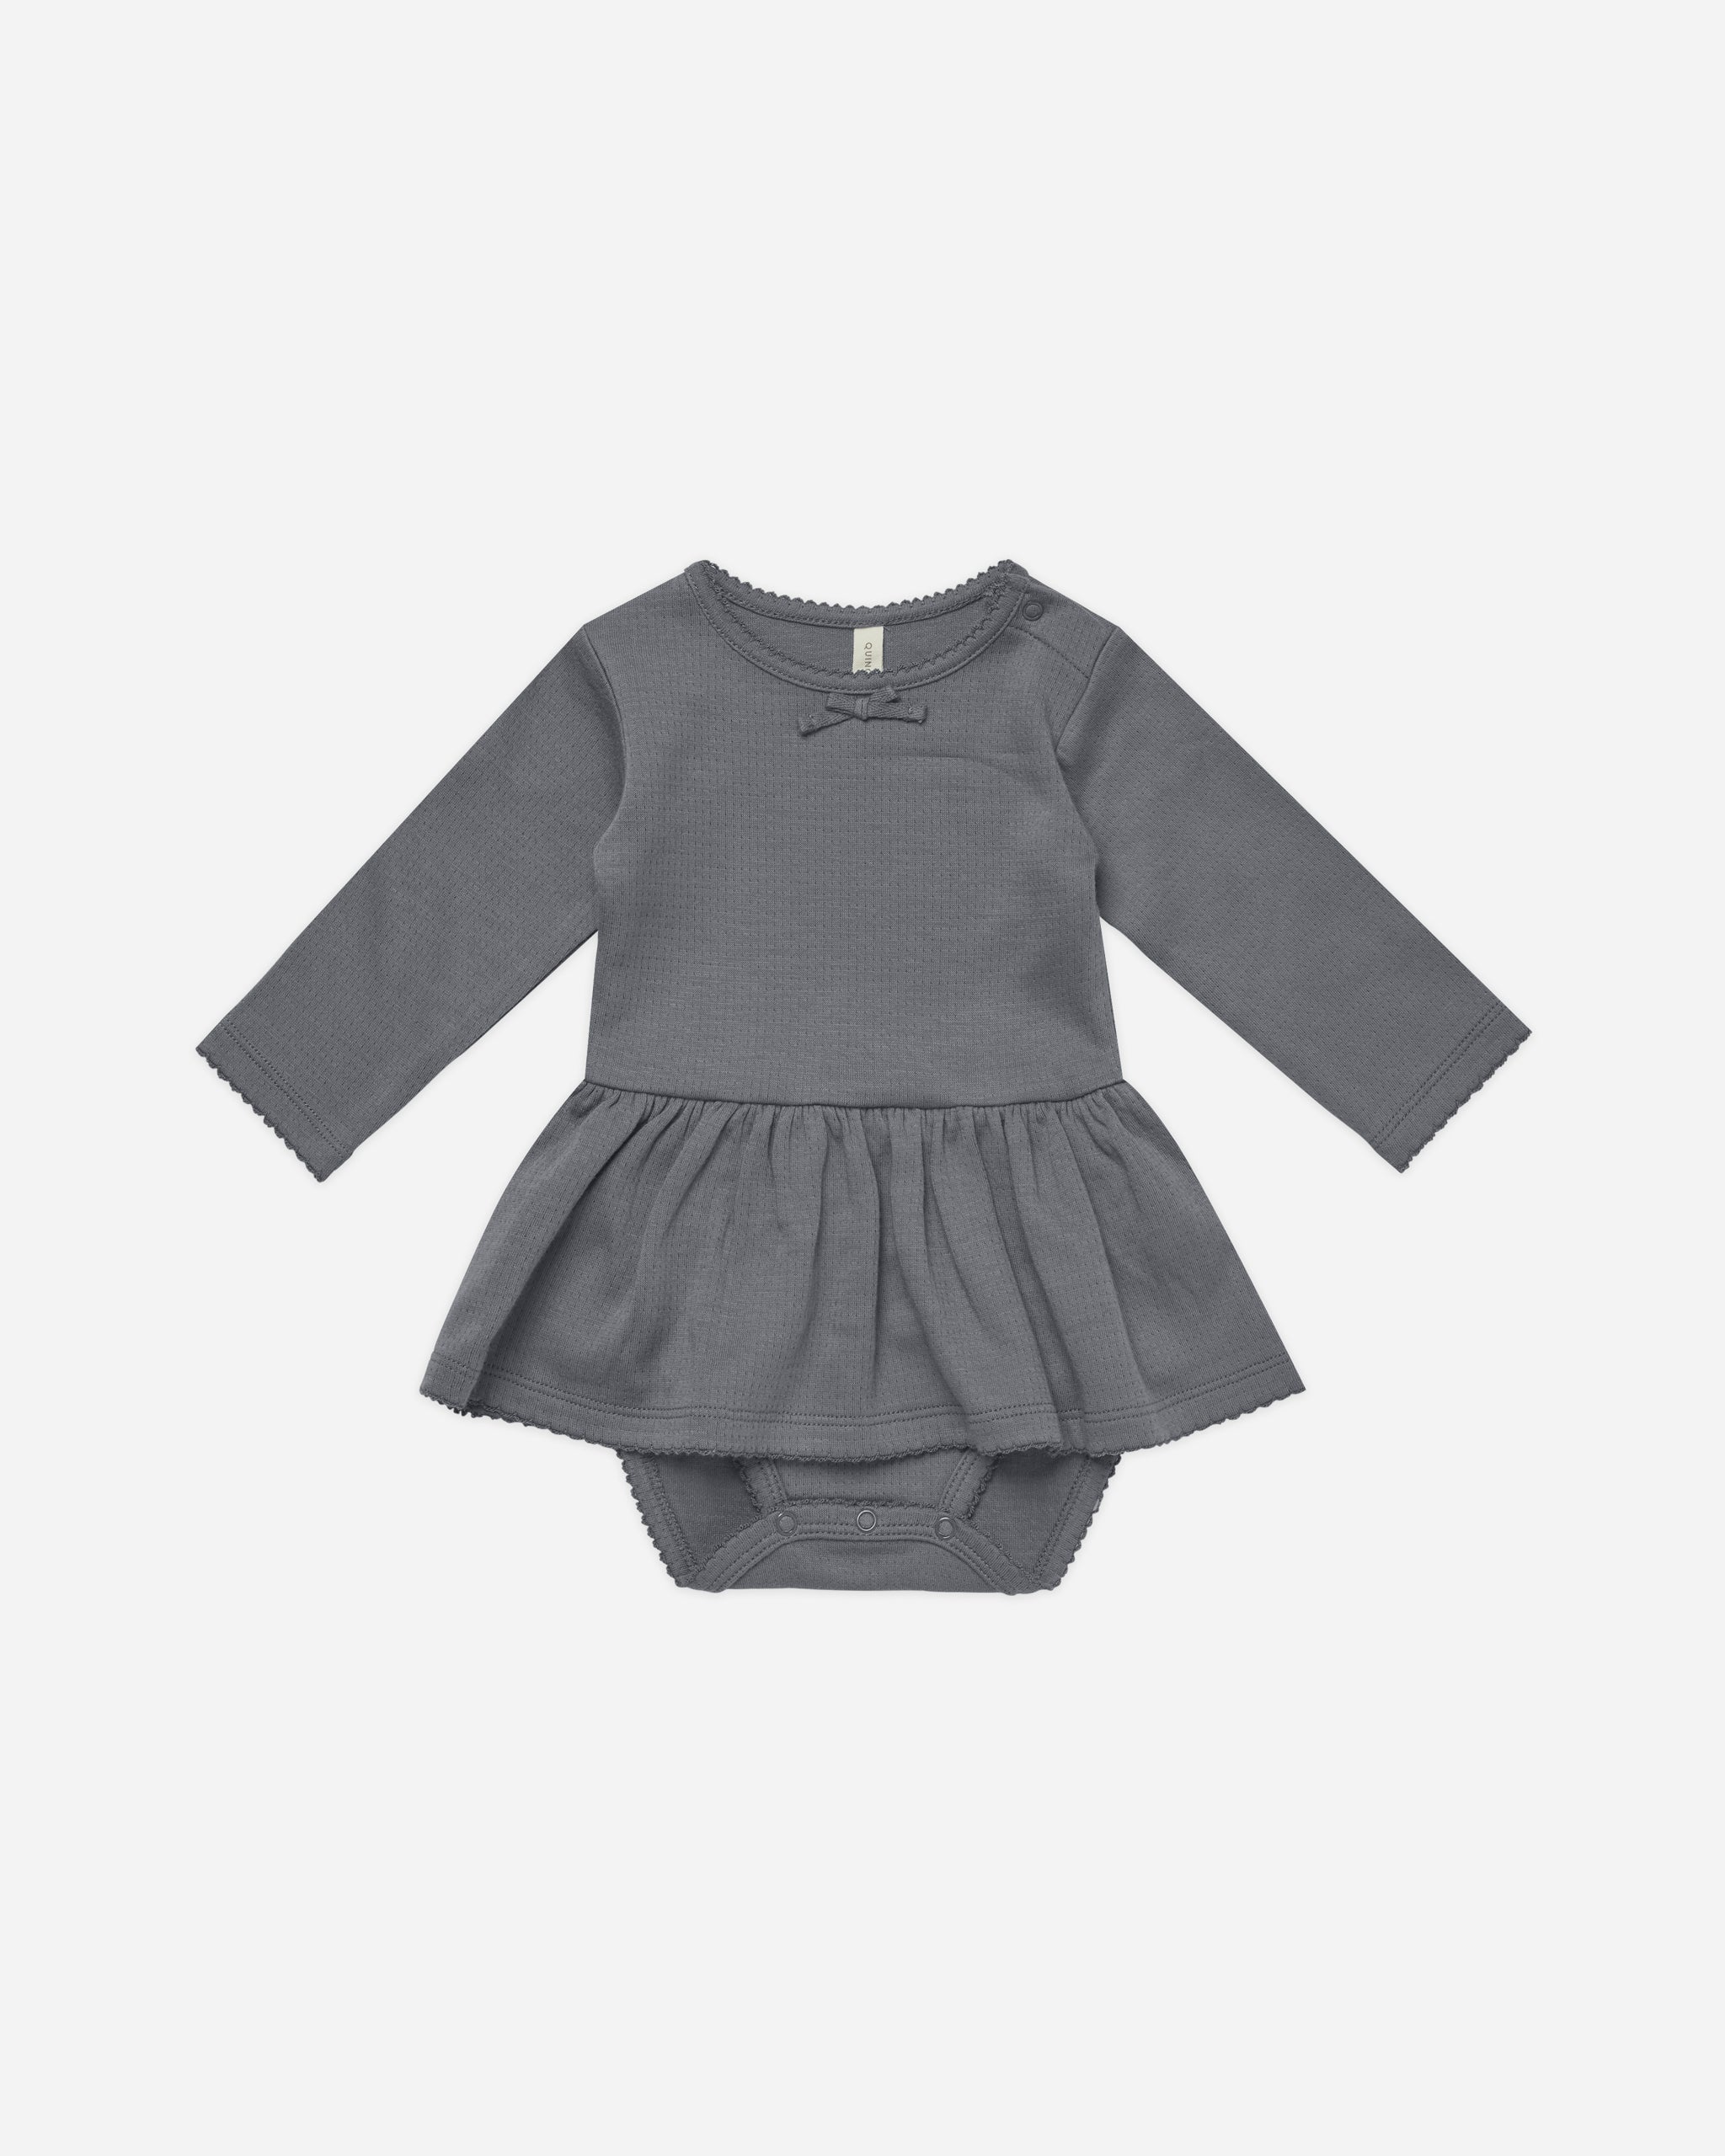 Pointelle Skirted Bodysuit || Navy - Rylee + Cru | Kids Clothes | Trendy Baby Clothes | Modern Infant Outfits |